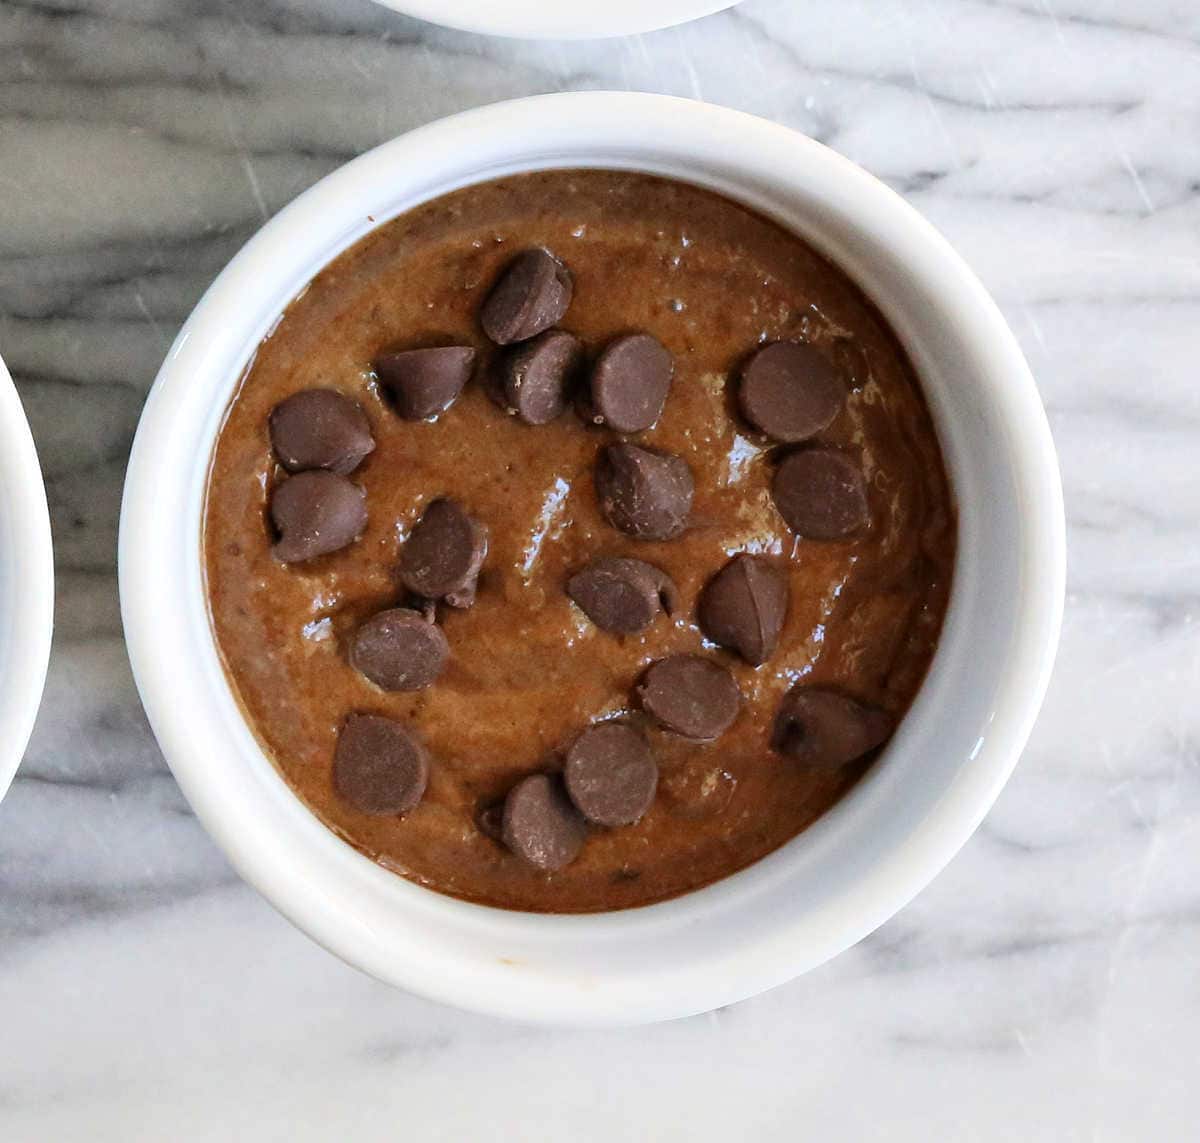 chocolate baked oats batter with chocolate chips on top in a ramekin